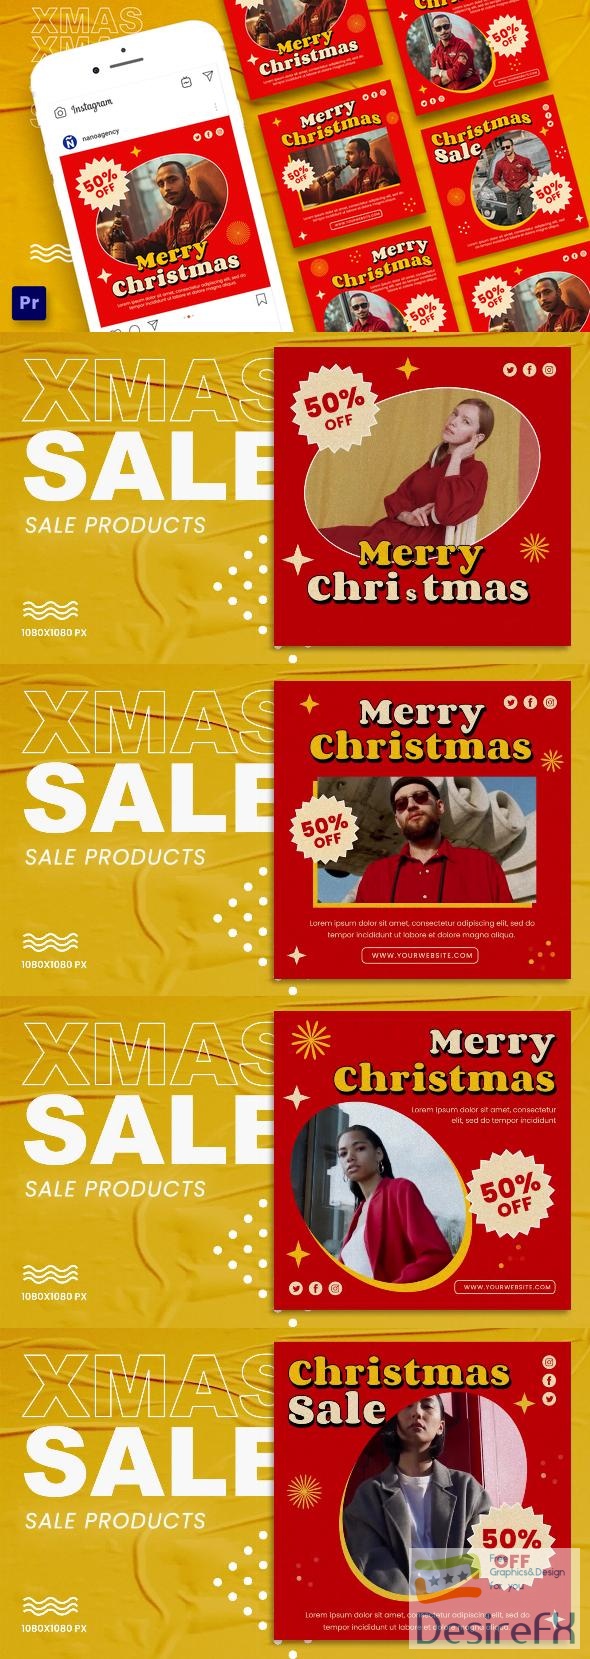 VideoHive Merry Christmas Sale Instagram Promo Post 42047621